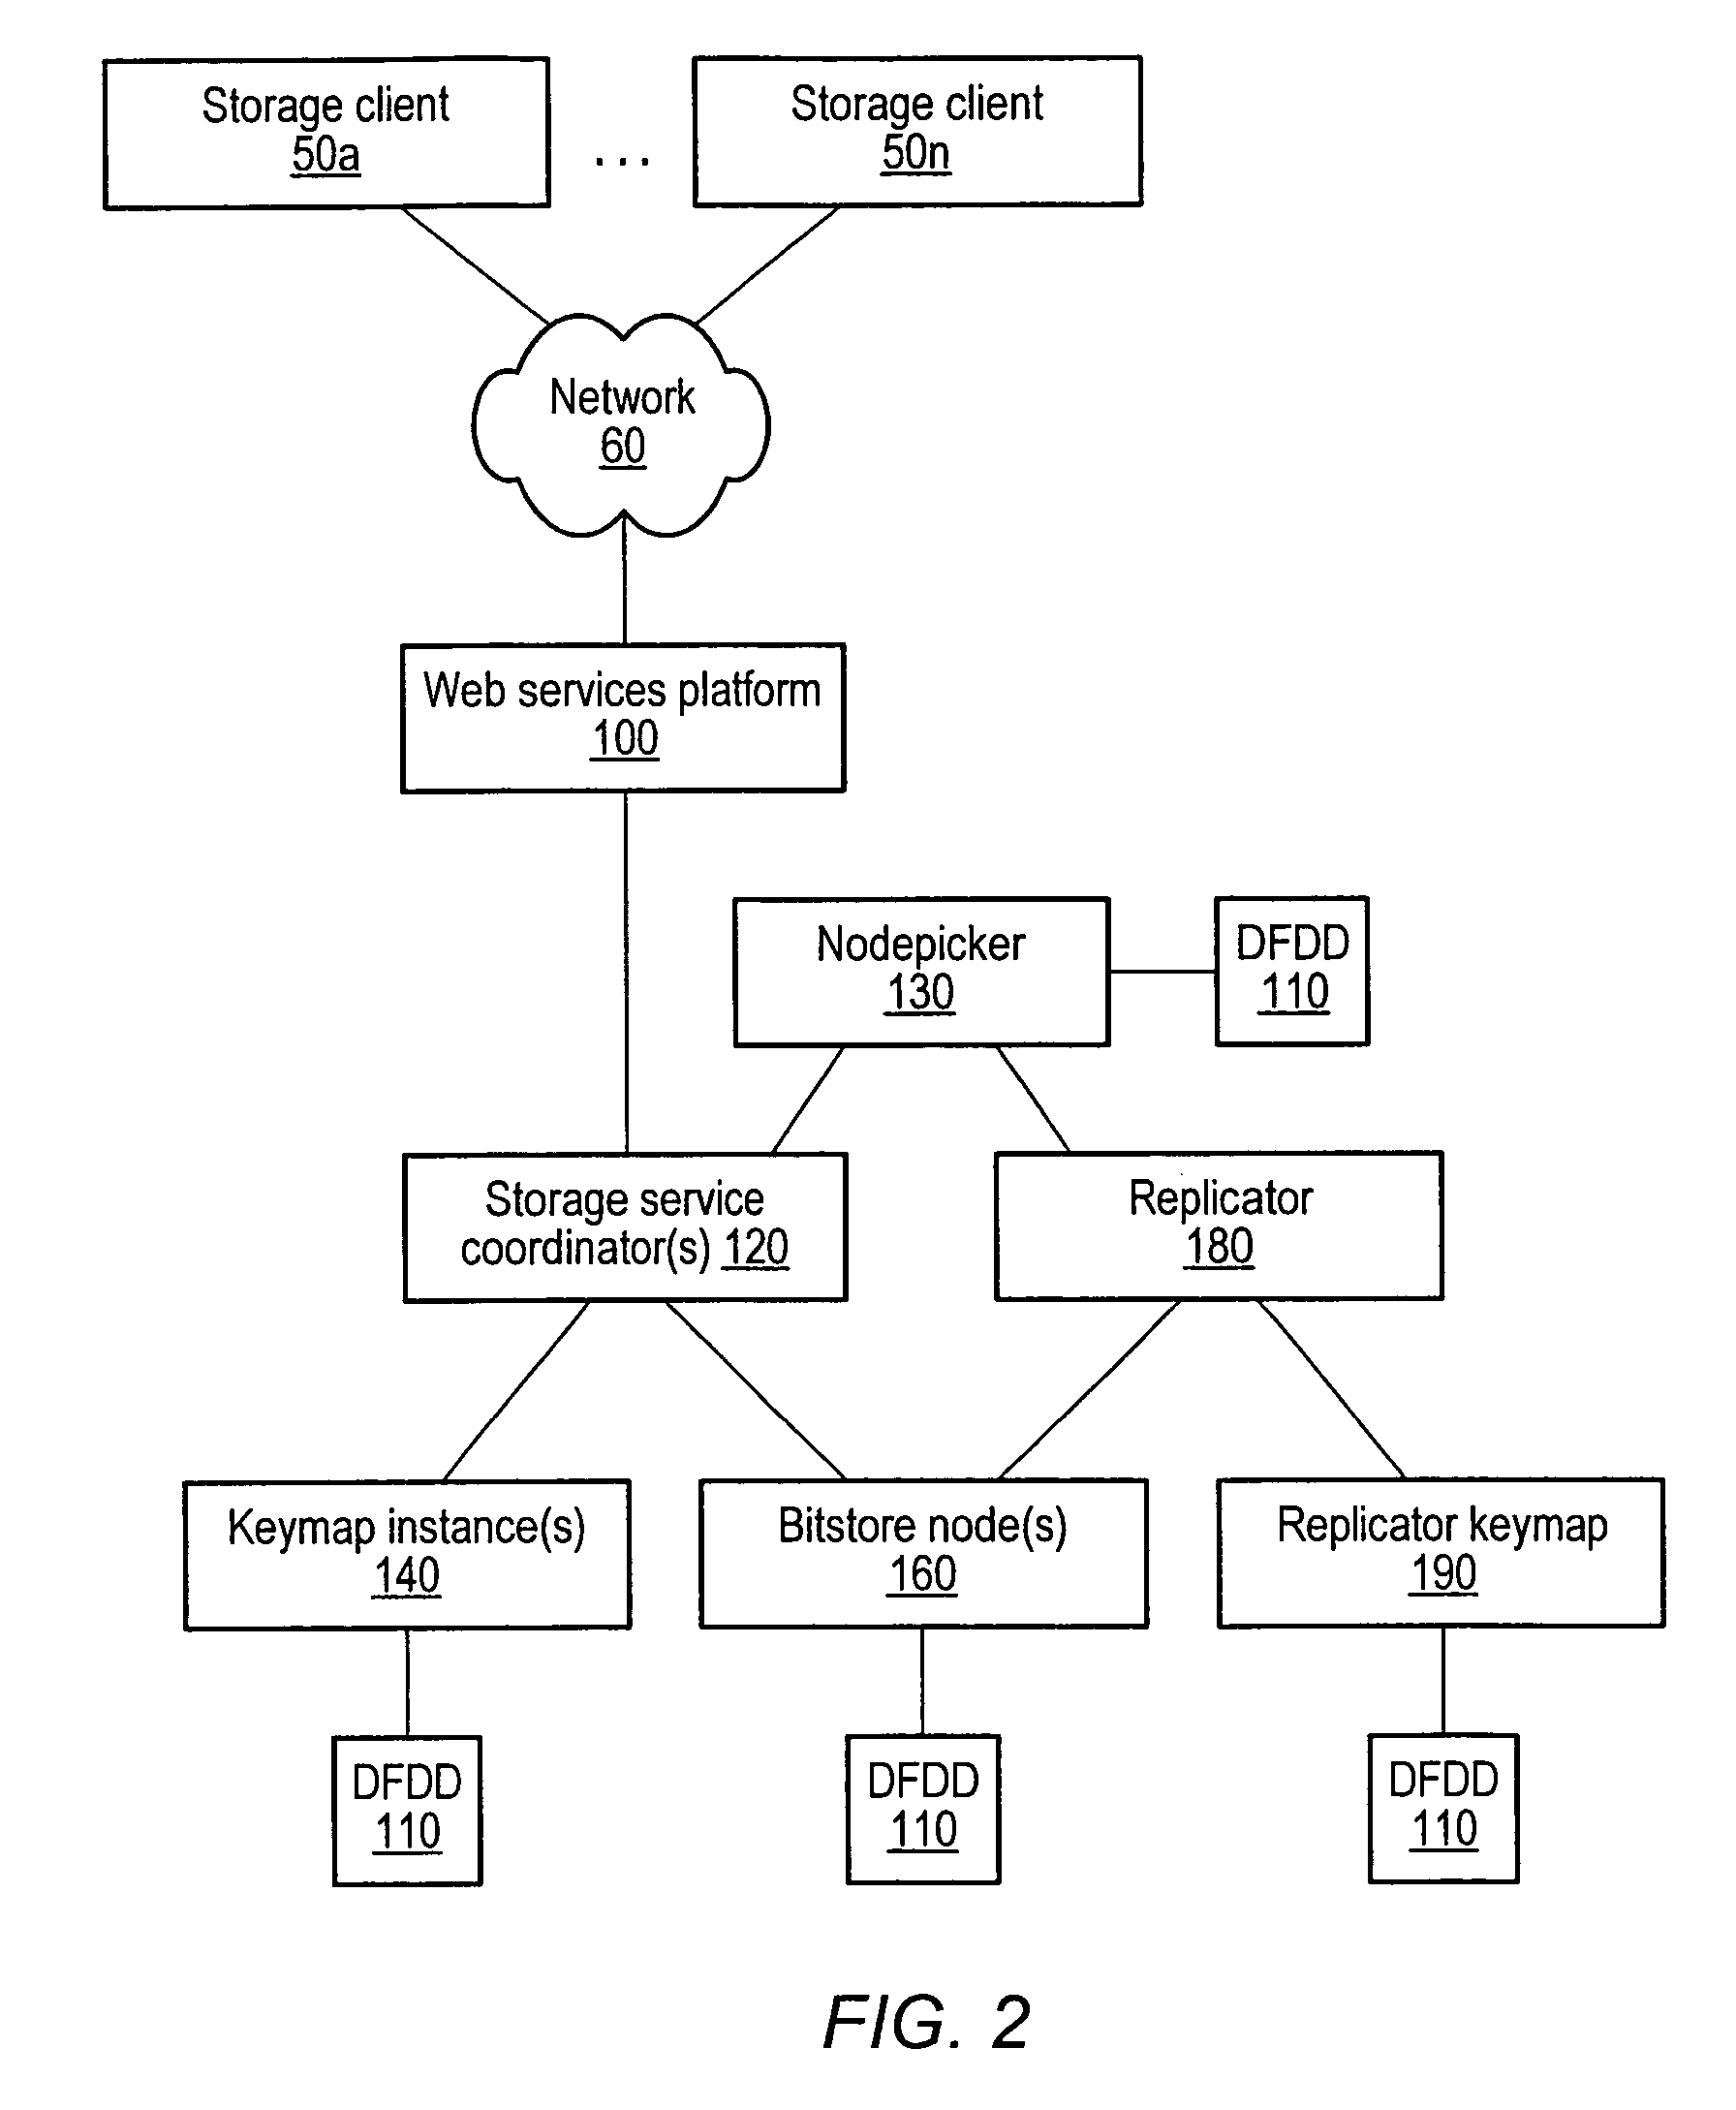 Distributed storage system with web services client interface